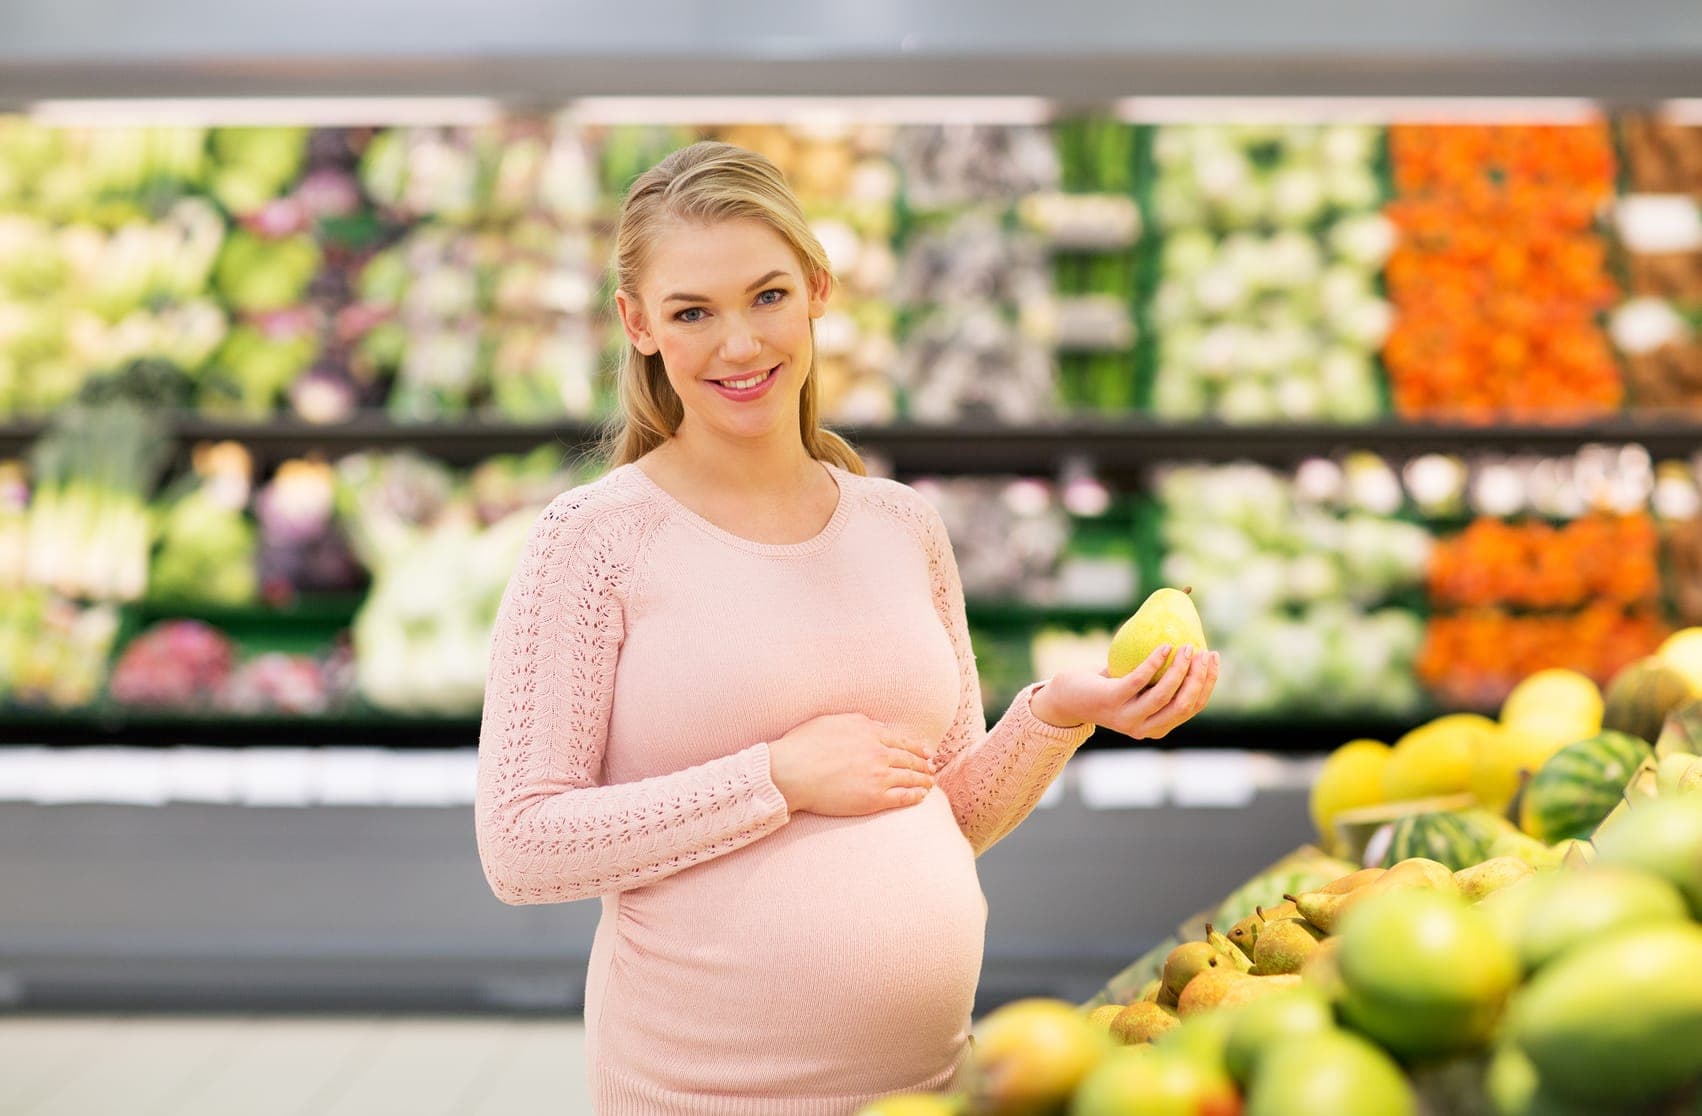 Thanks to a Vegan Diet, Your Pregnancy Just Got Easier